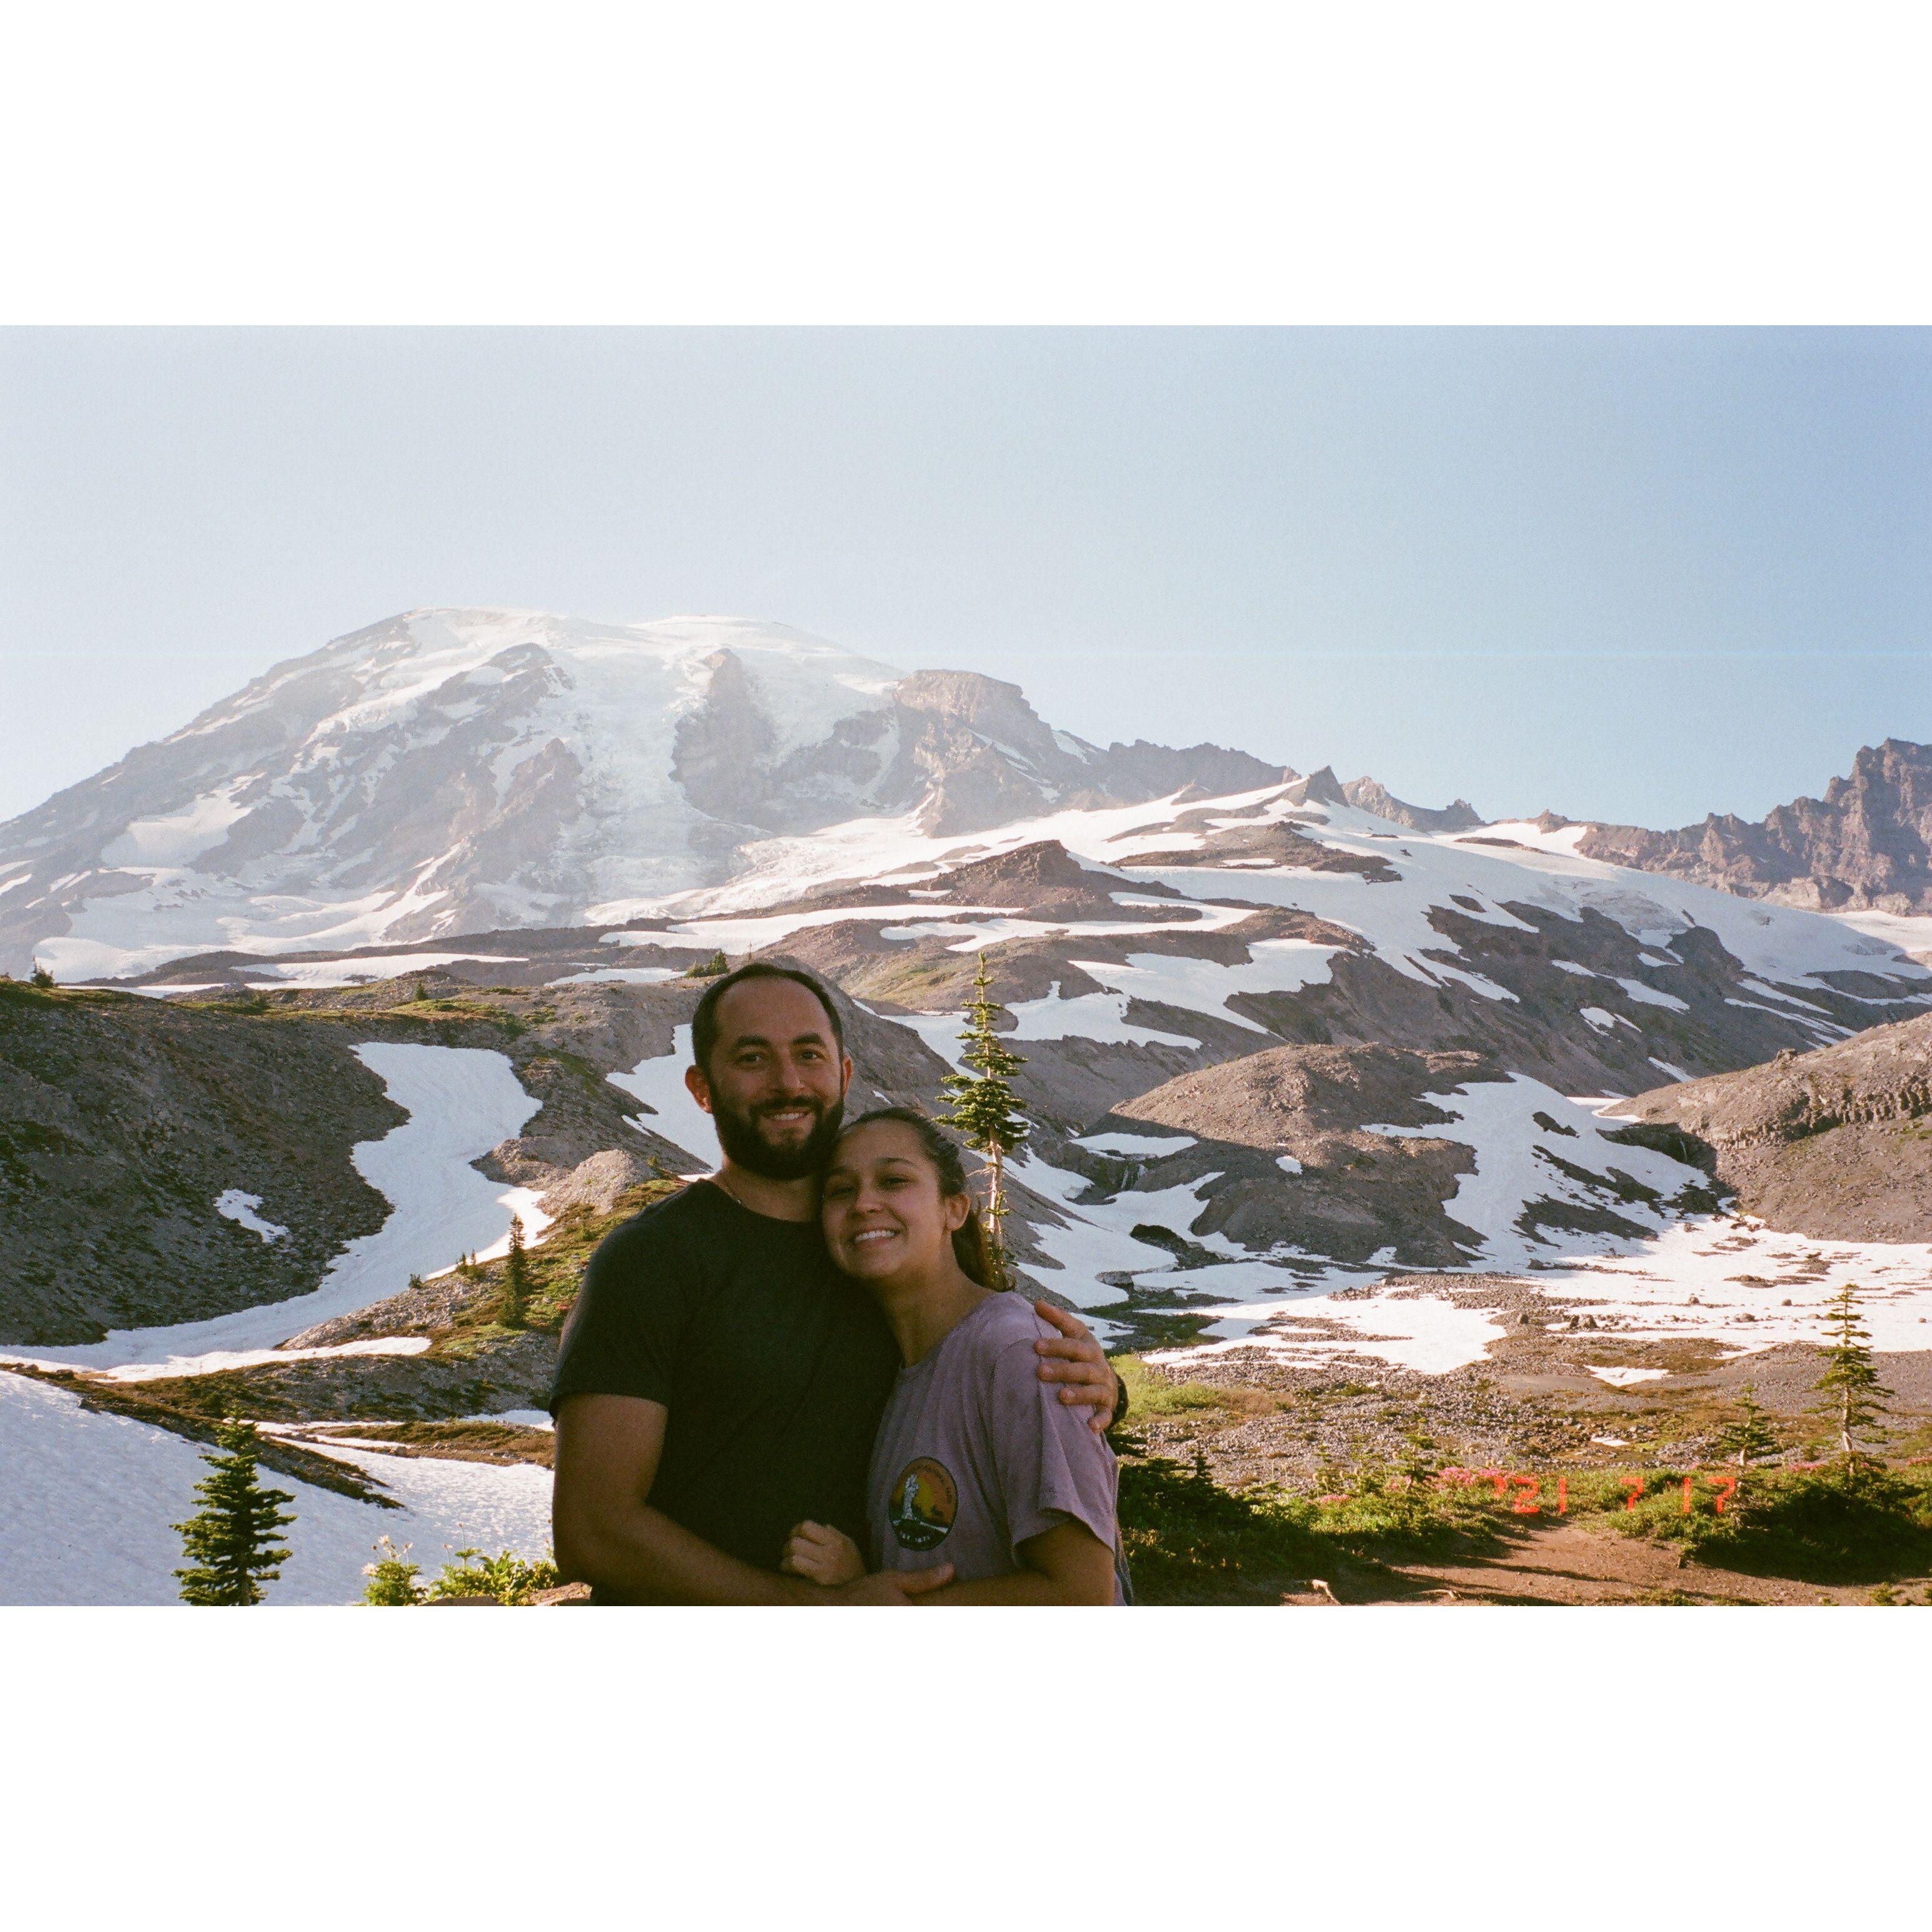 One of our many visits to our favorite mountain in Washington, Mount Rainier (Sorry, Mount Baker!).